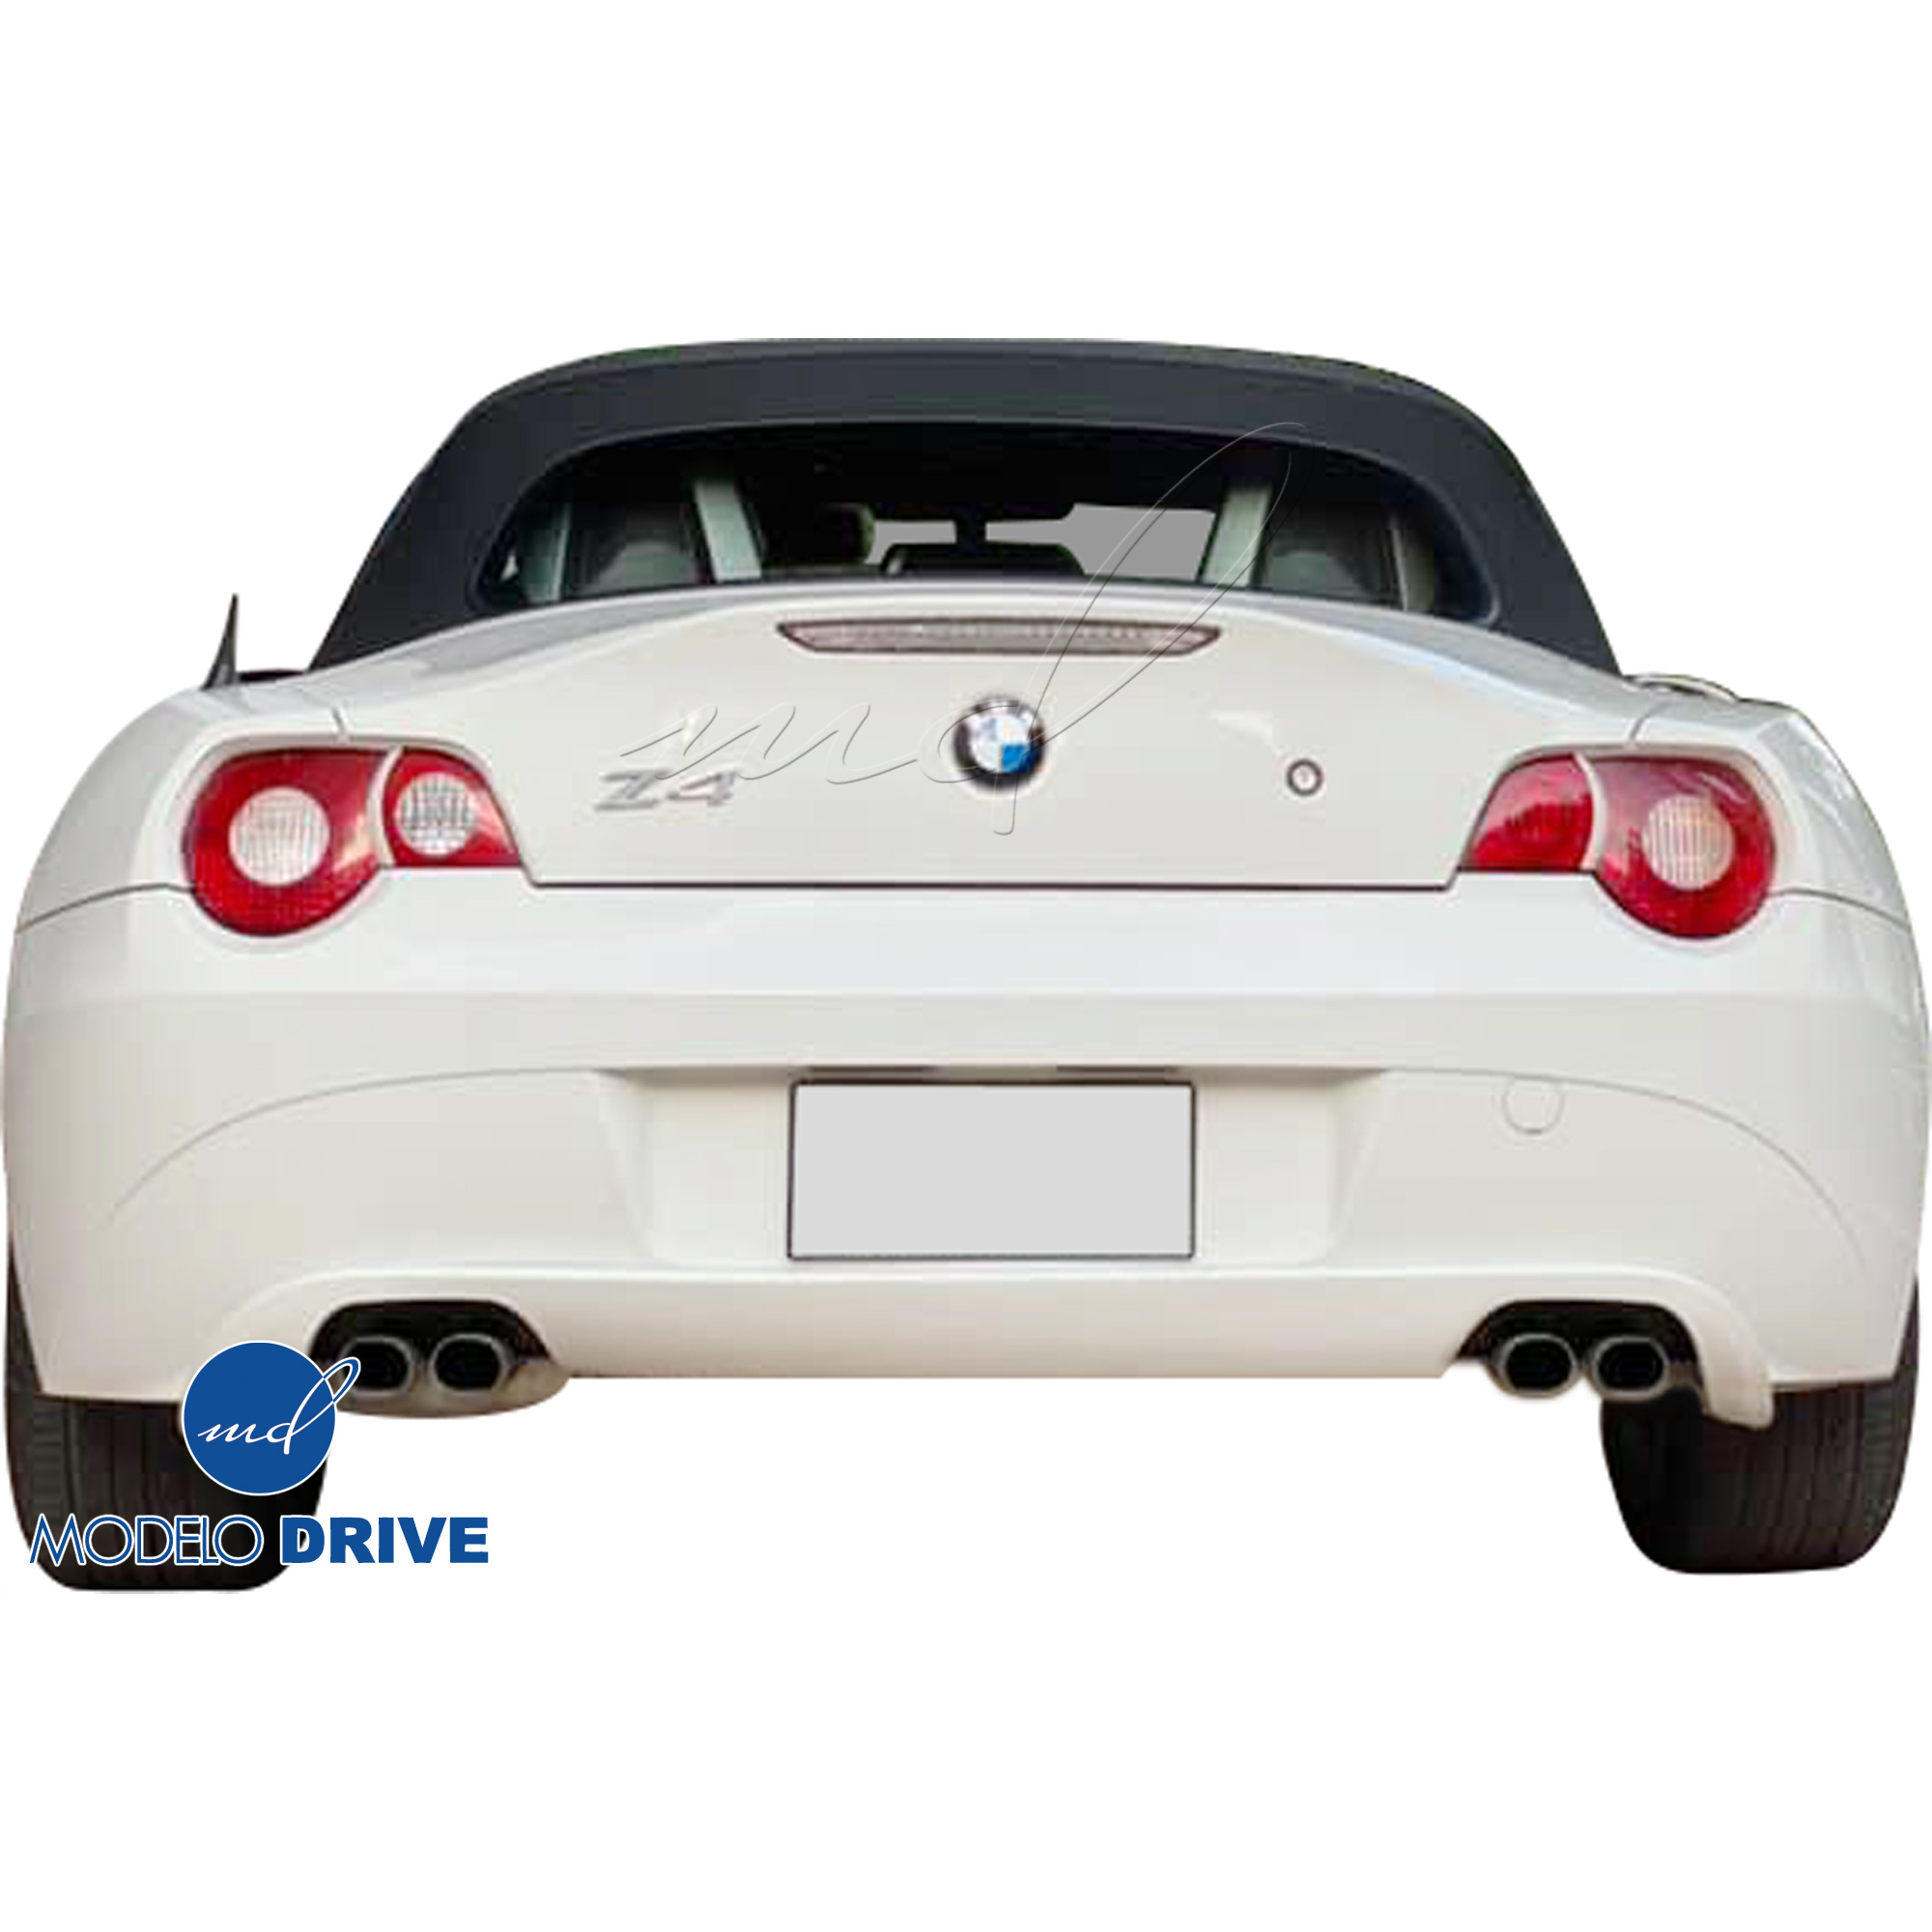 ModeloDrive FRP AERO Diffuser (dual exhst cut outs) > BMW Z4 E85 2003-2005 - Image 16